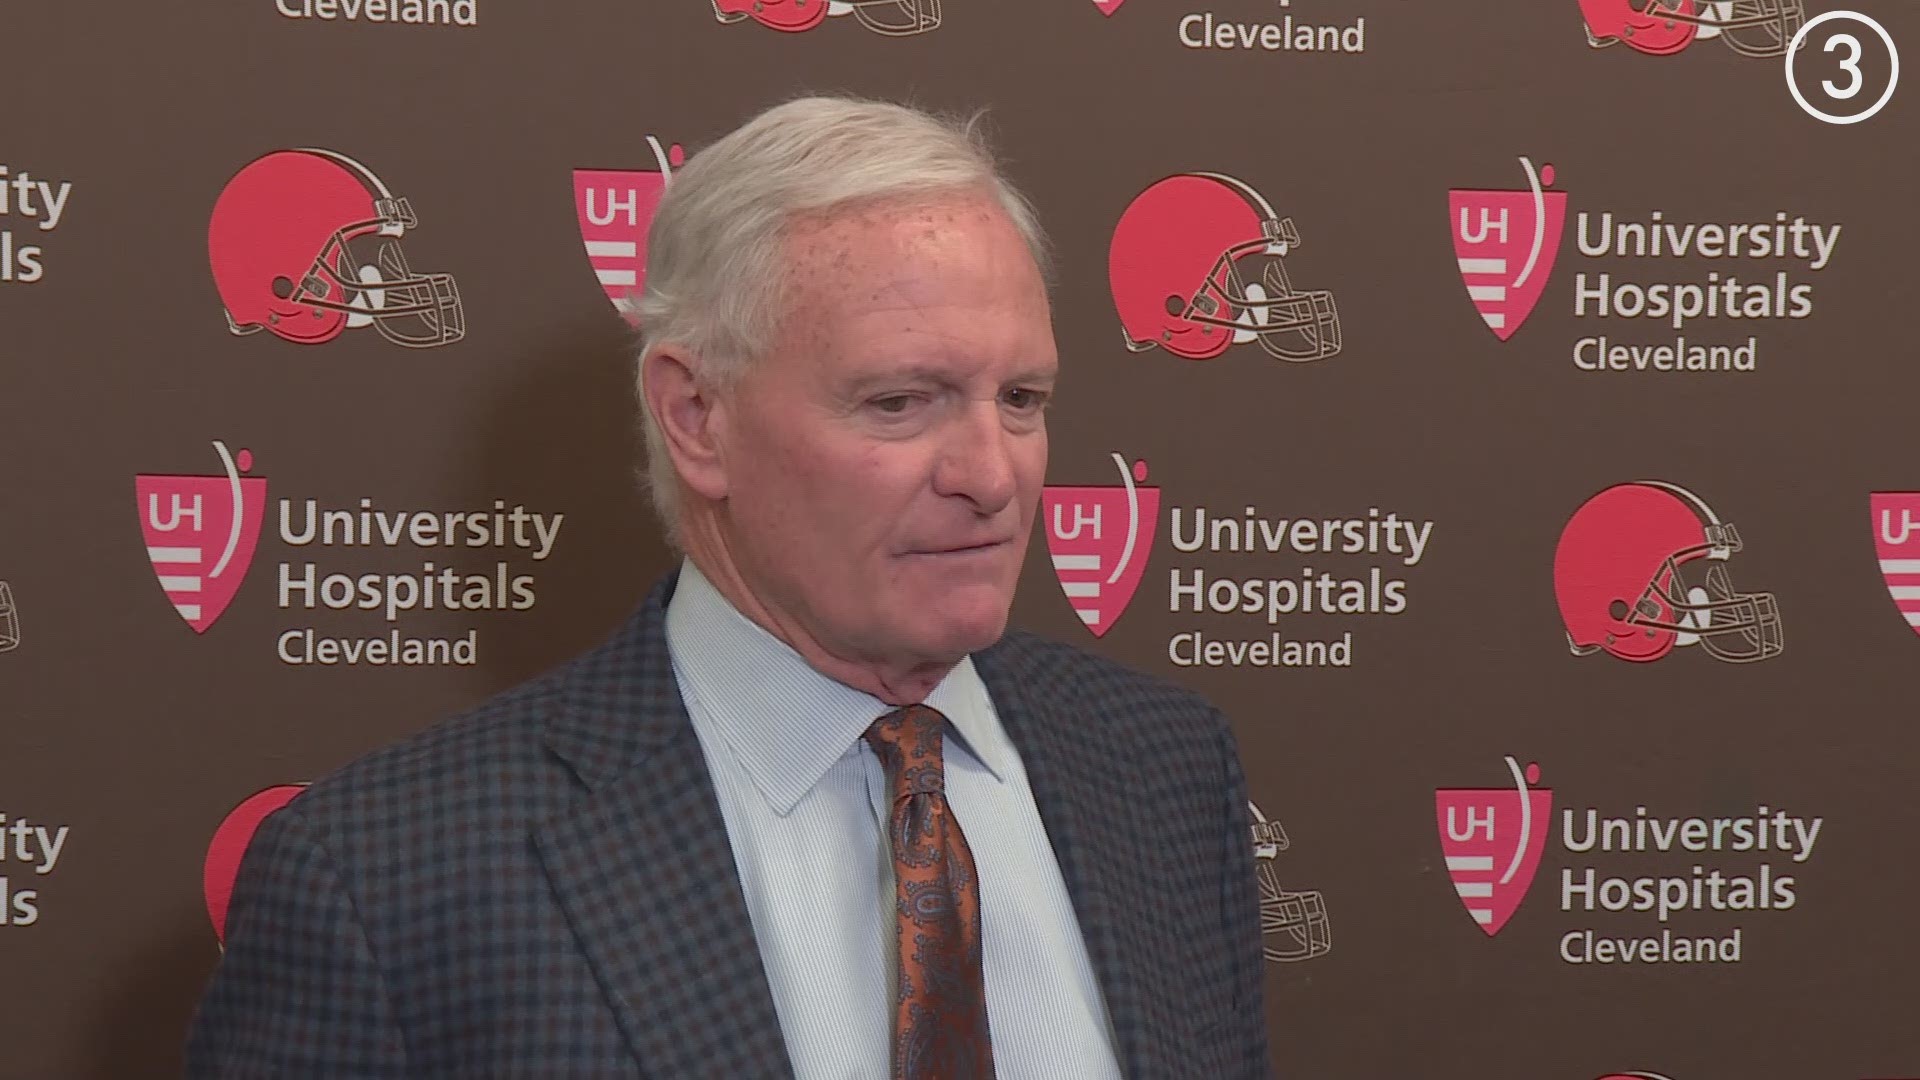 Browns owner Jimmy Haslam calls Kareem Hunt's latest incident with the police, "not acceptable."  Browns want players who are, "smart, tough and accountable."